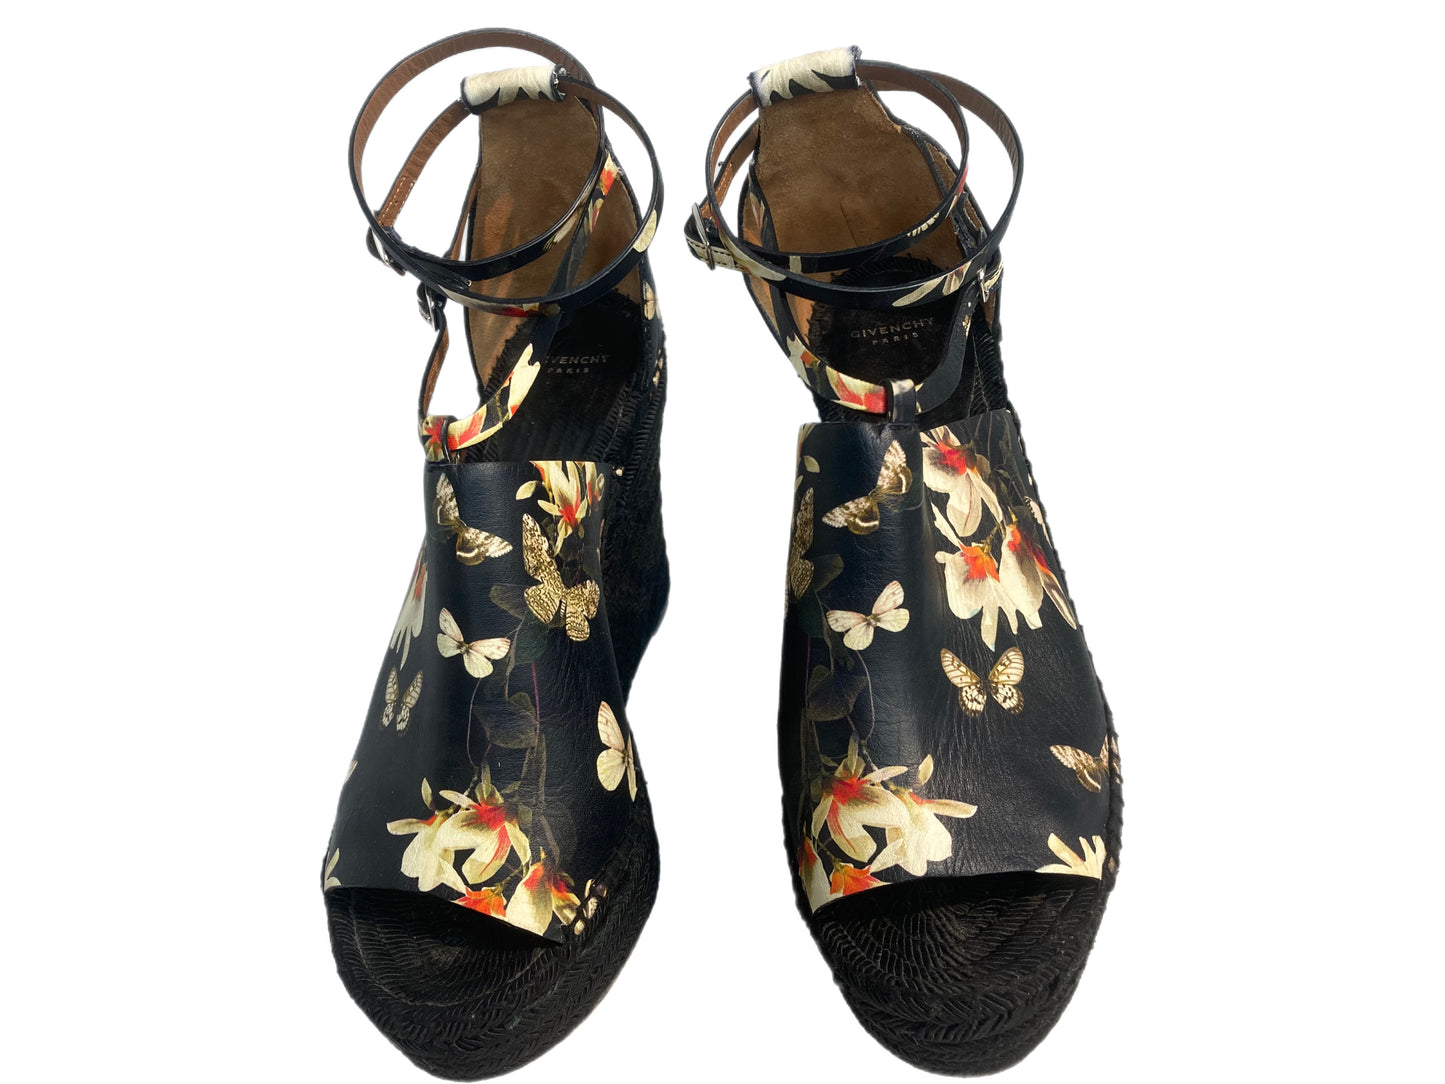 GIVENCHY Leather Floral Rope Wedges Black Size 39.5